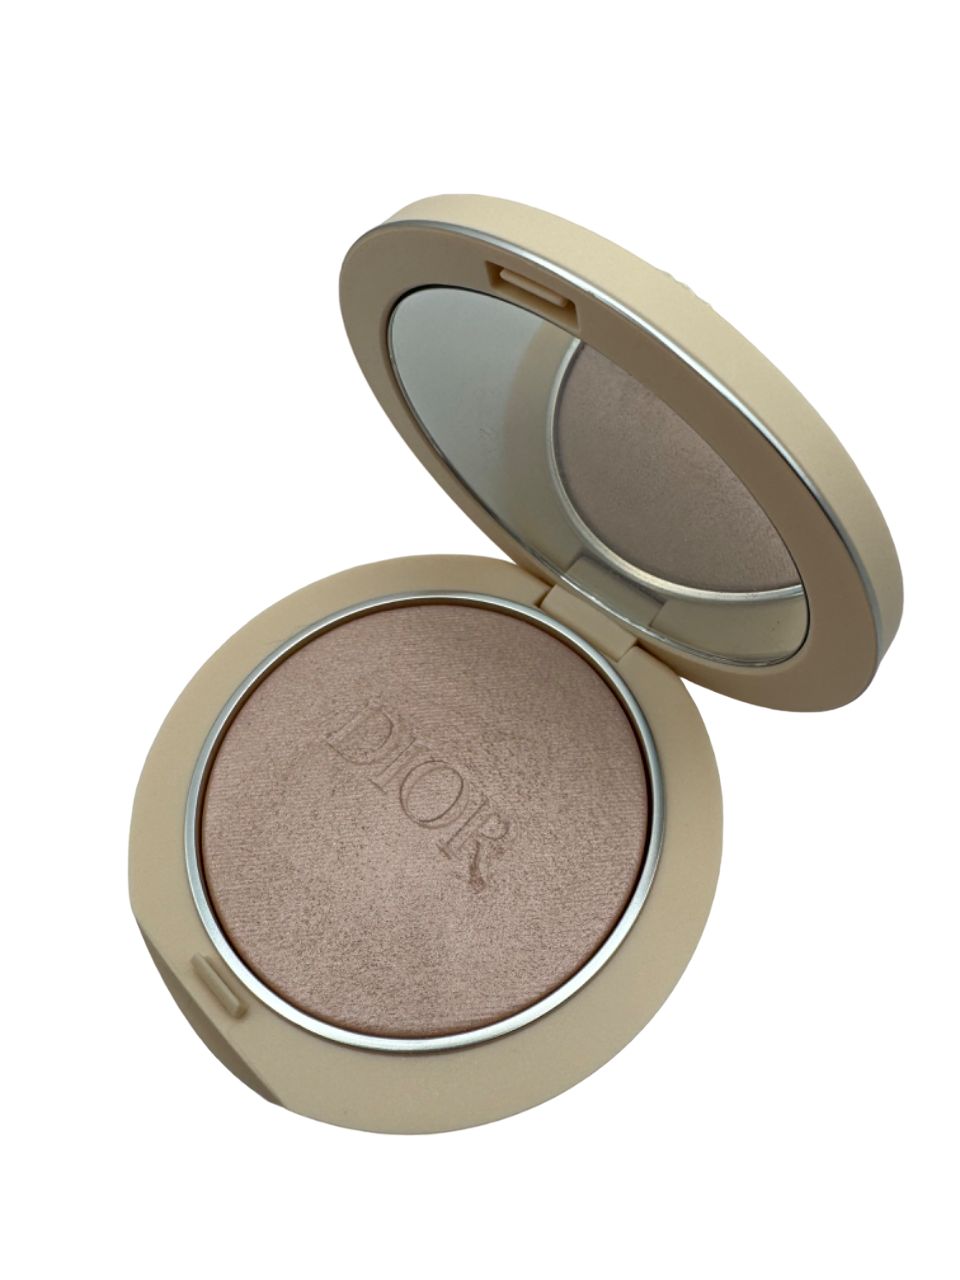 Dior Forever Couture Luminizer Highlighting Powder 02 Pink Glow